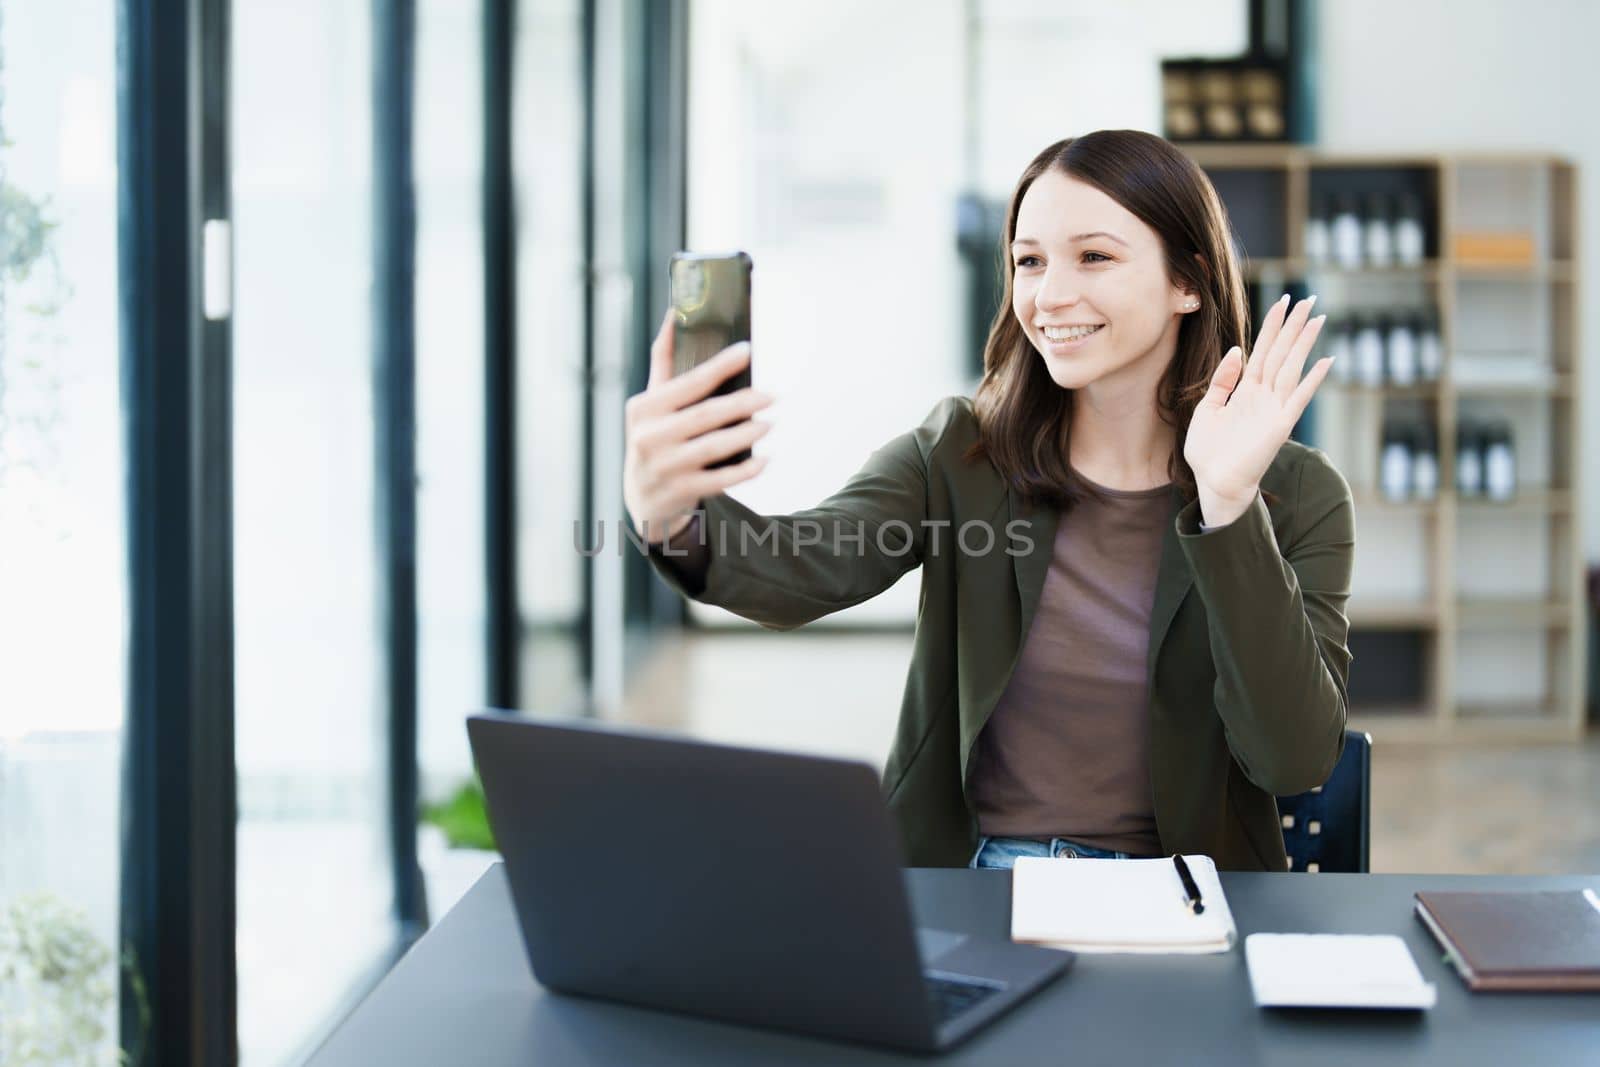 business owner or Asian female marketers are using business phones in office work by Manastrong